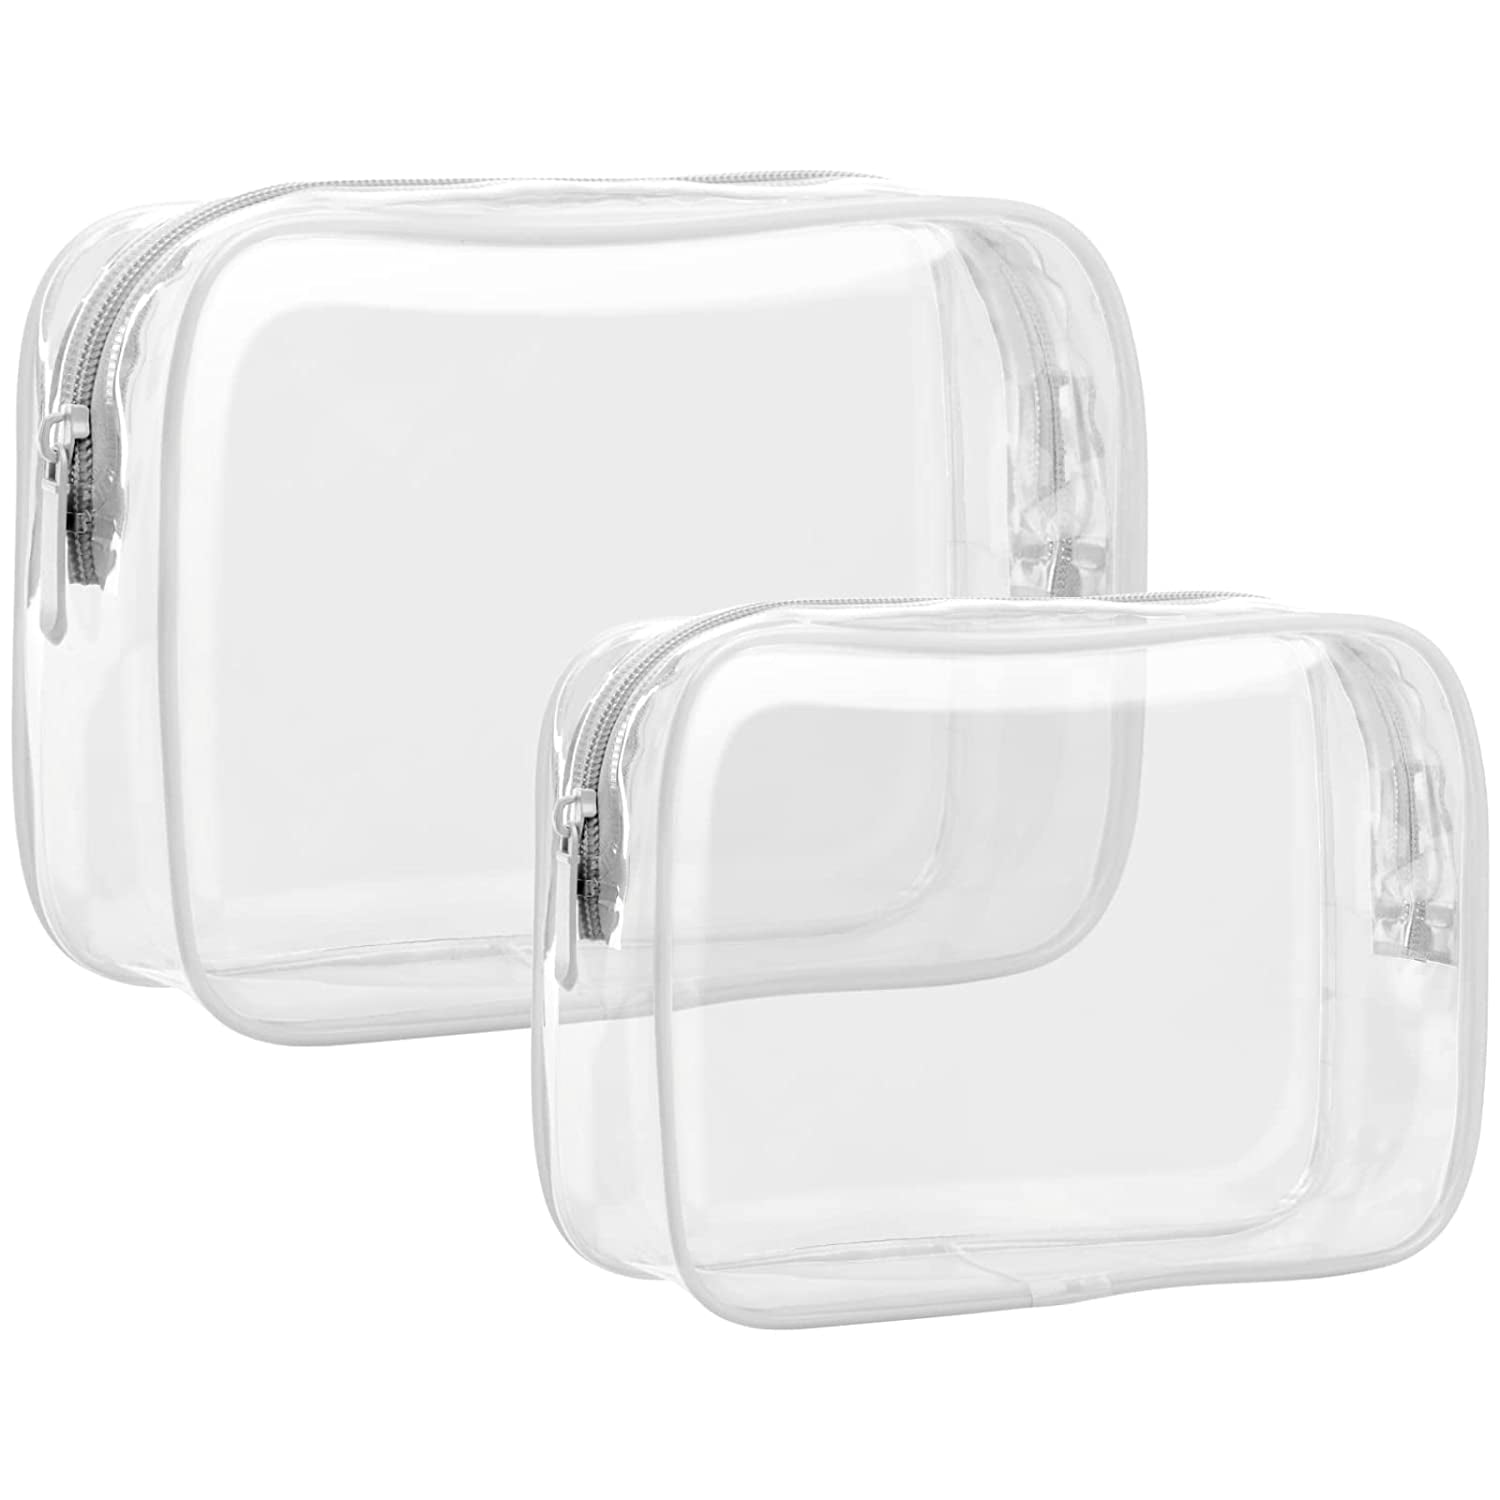 TSA Approved Clear Toiletry Bag ,DARIN 2PC Travel Makeup Bag Zipper Cosmetic  Pouch , Airline 3-1